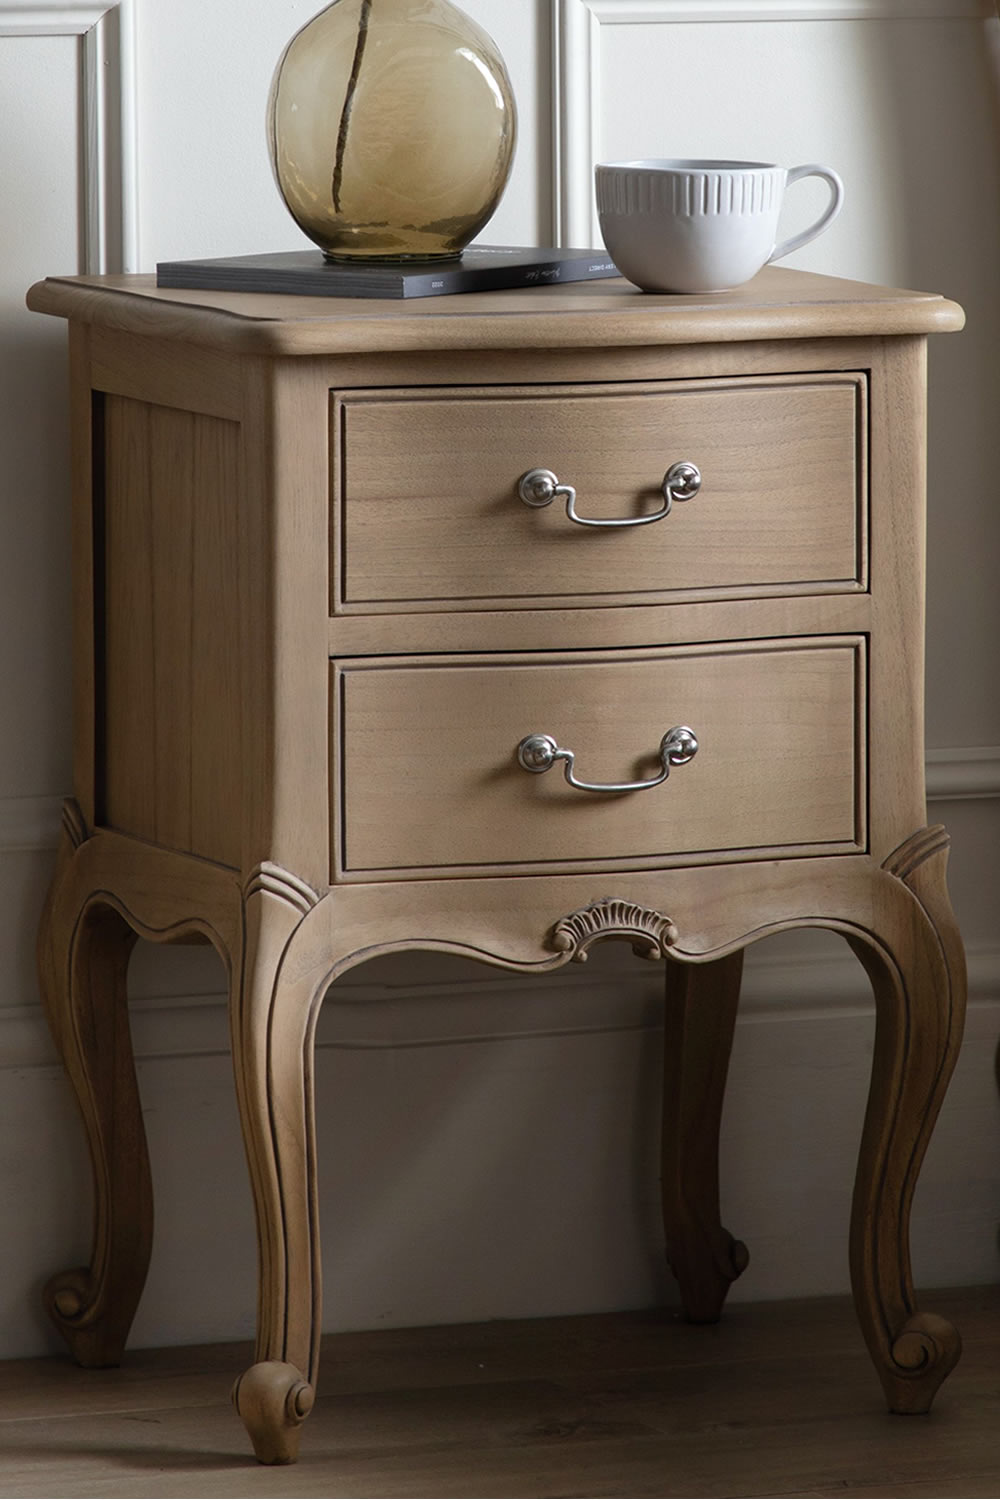 View Chic 2drawer Bedside Table With Decorative Handles Weathered Finish Ample Storage Space Living Room Or Bedroom Storage Table Frenchinspired information